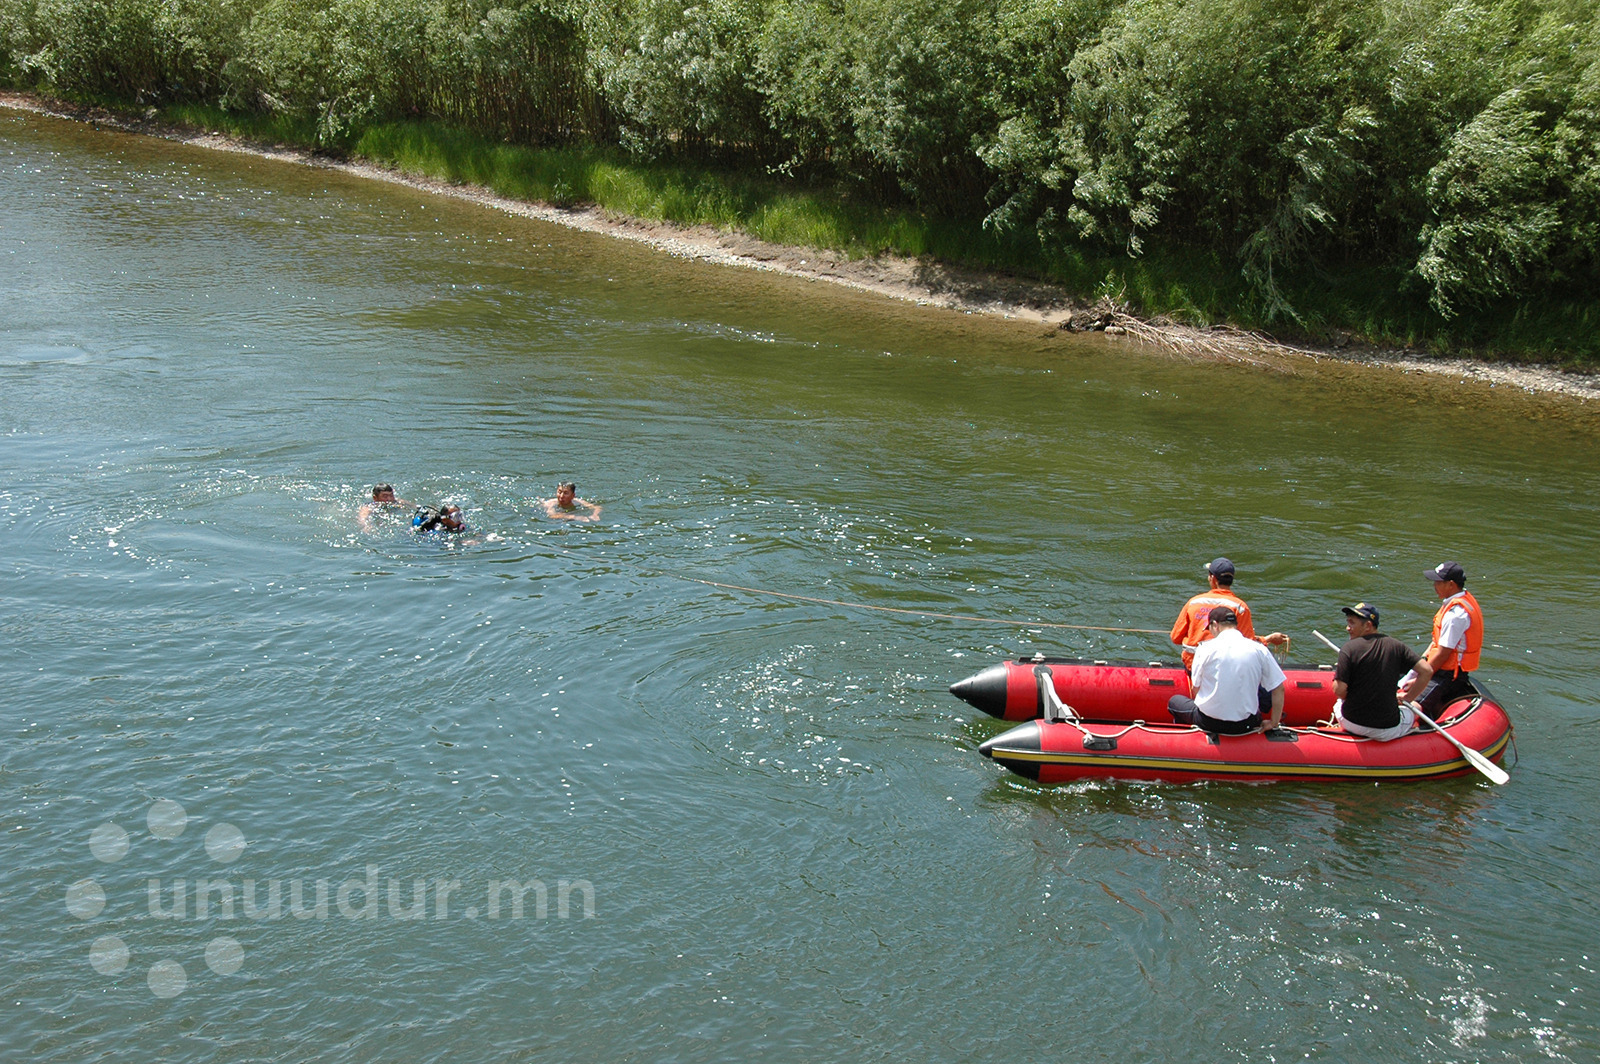 Water accidents surge